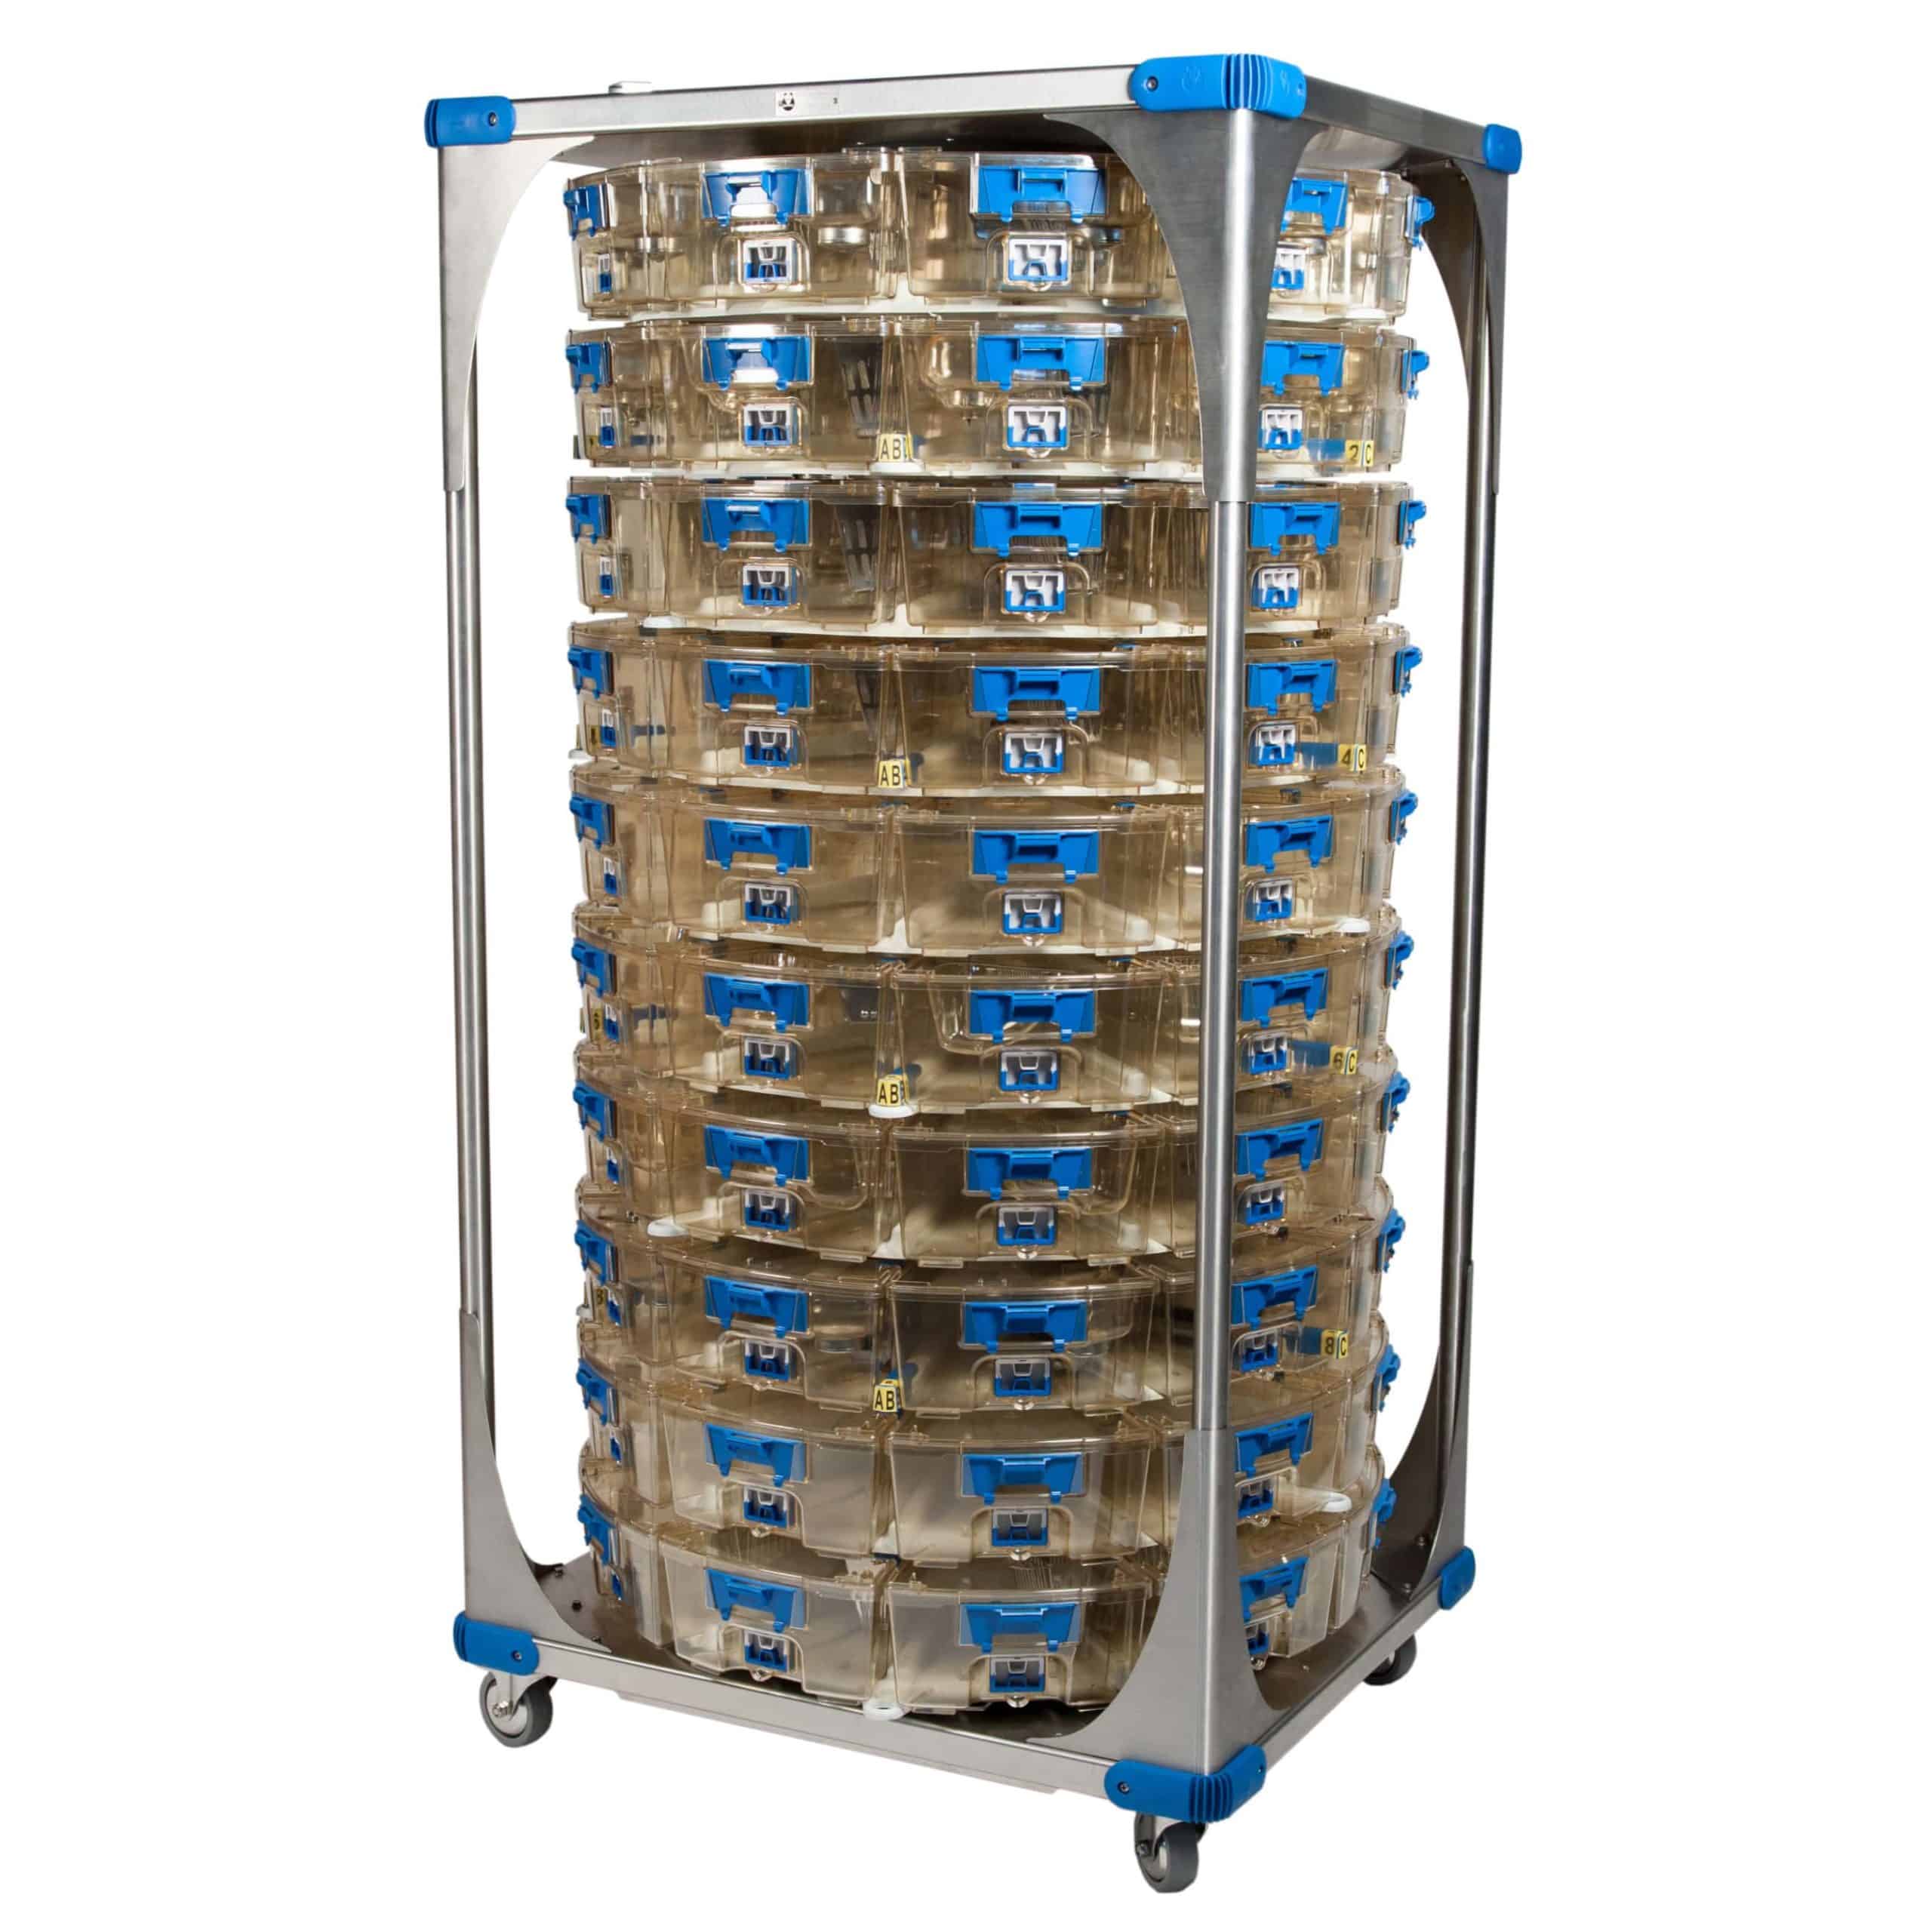 Animal Care Systems, Optimice Rack